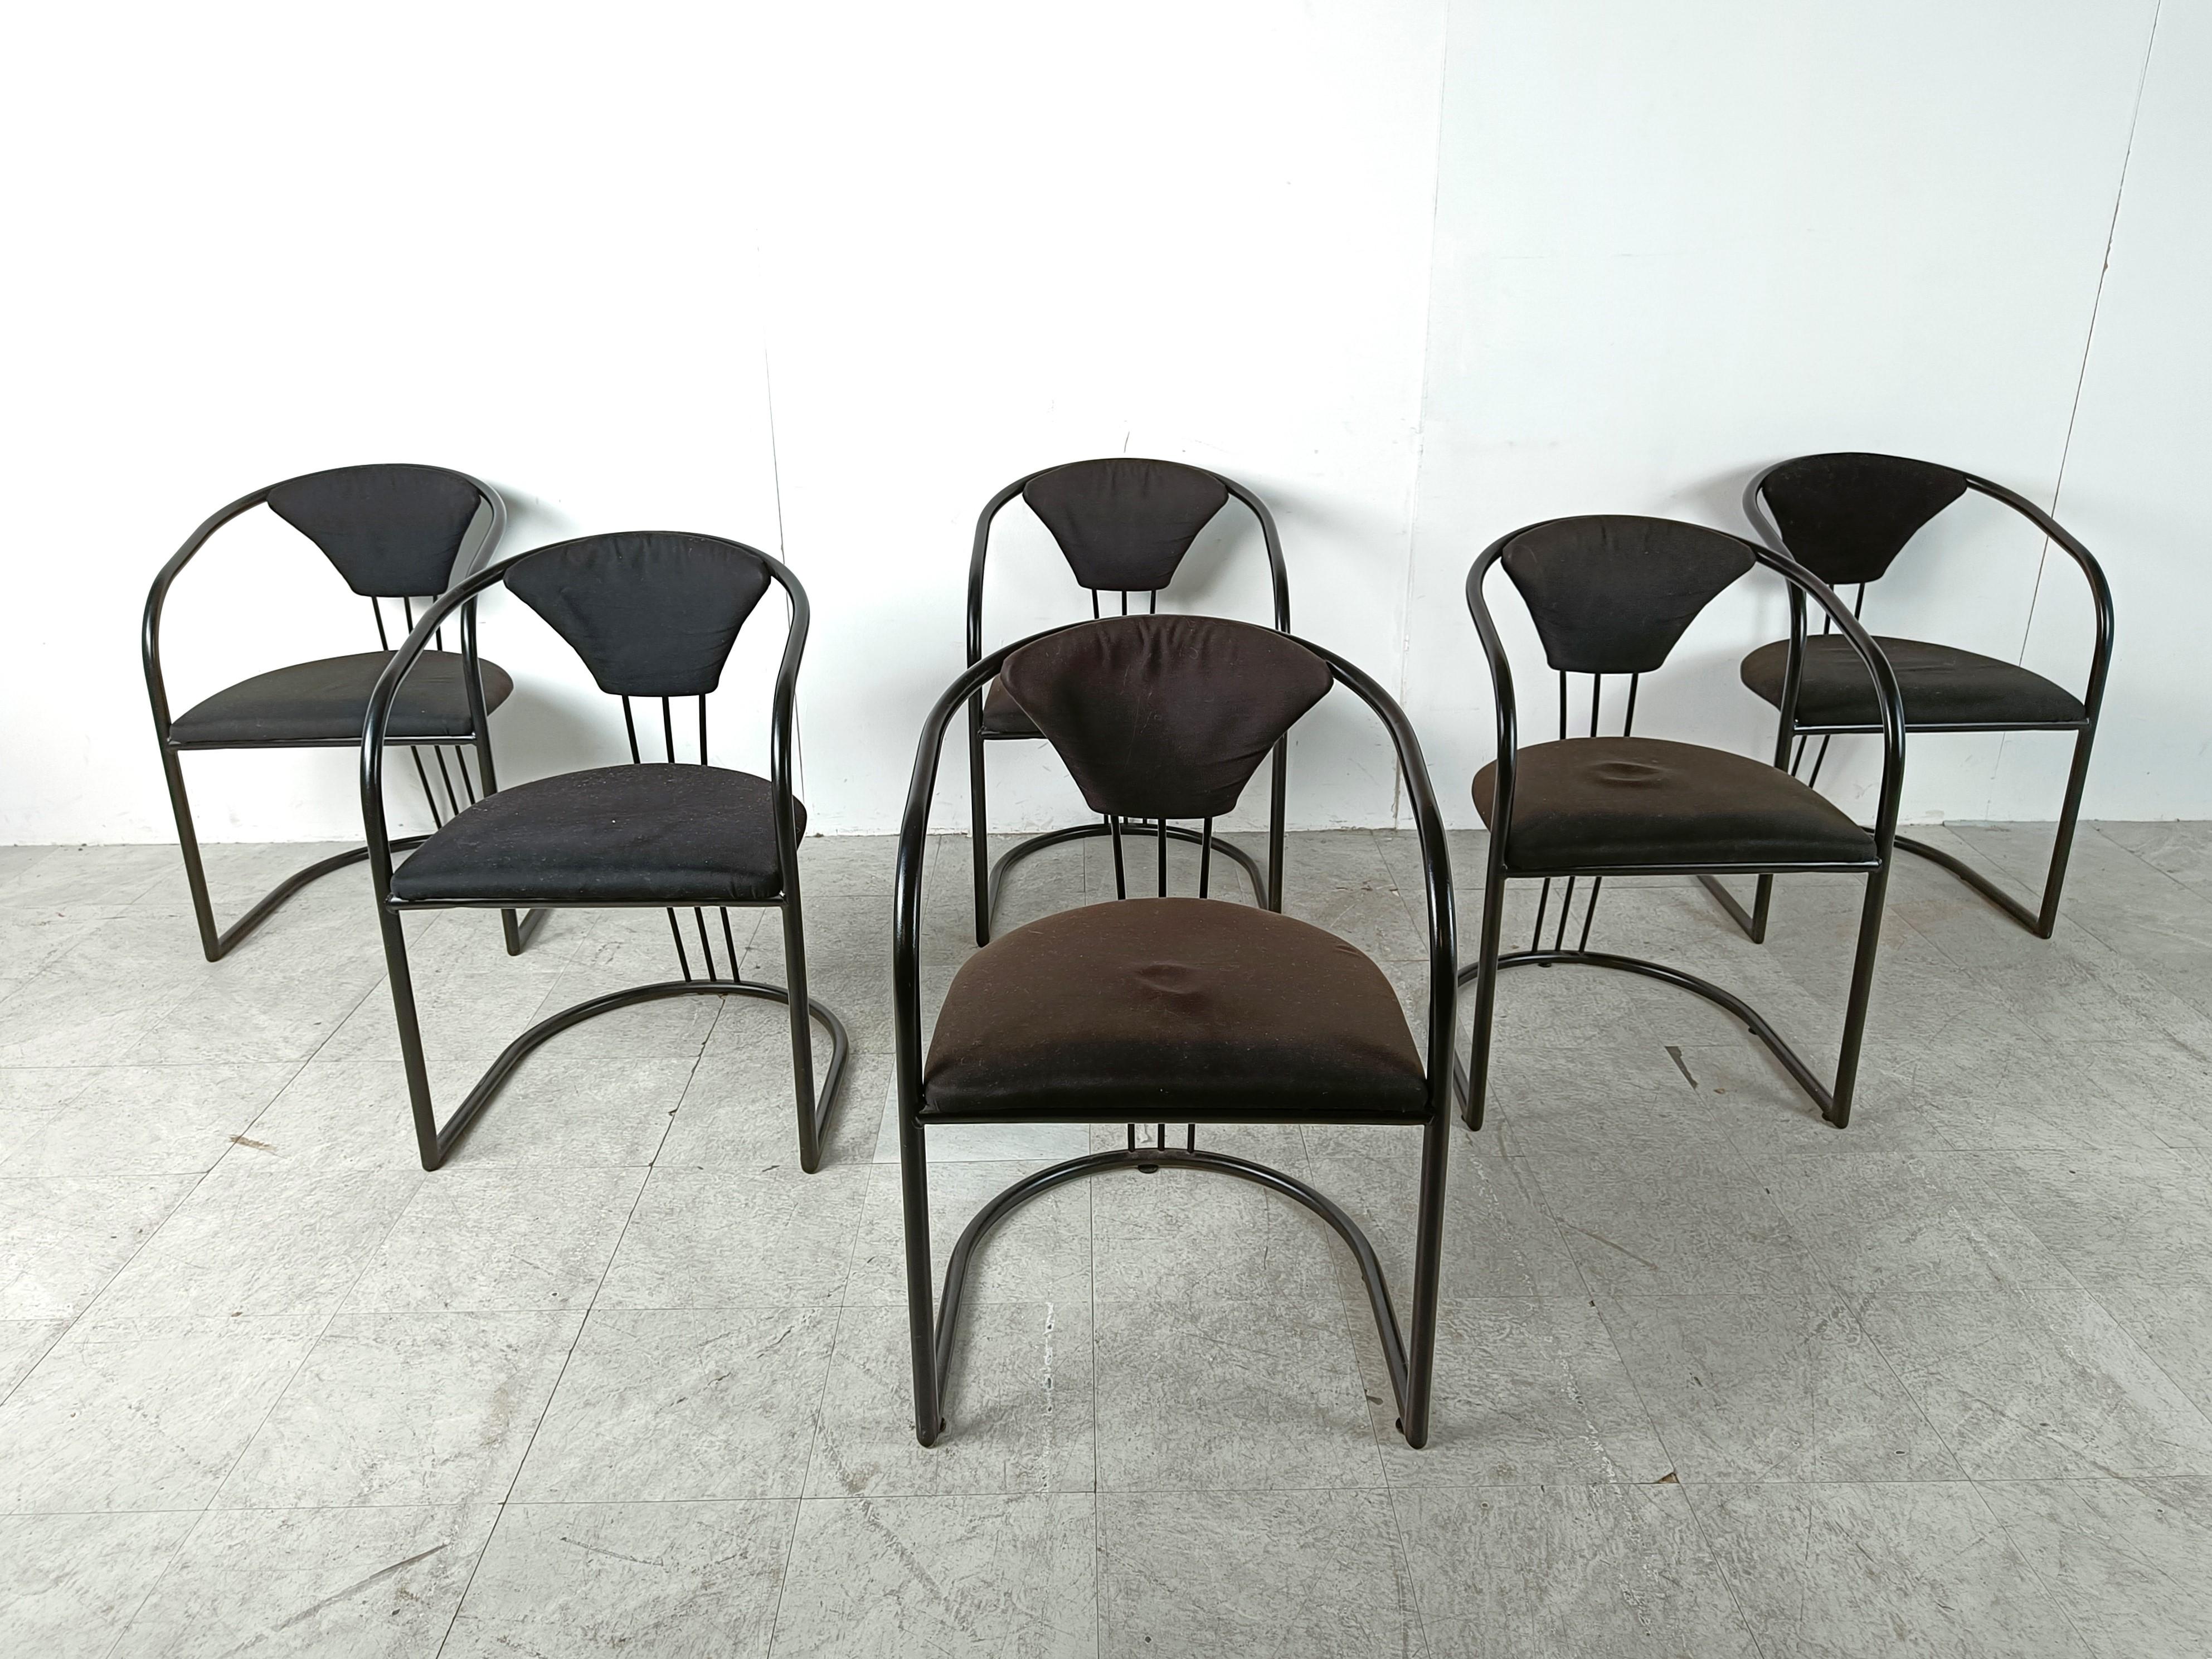 Vintage postmodern metal dining chairs with black fabric seats.

Elegant 1980s design.

Black fabric upholstery in good condition.

We can reupholster these chairs uppon request.

1980s - Italy

Dimensions:
Height: 80cm/31.49